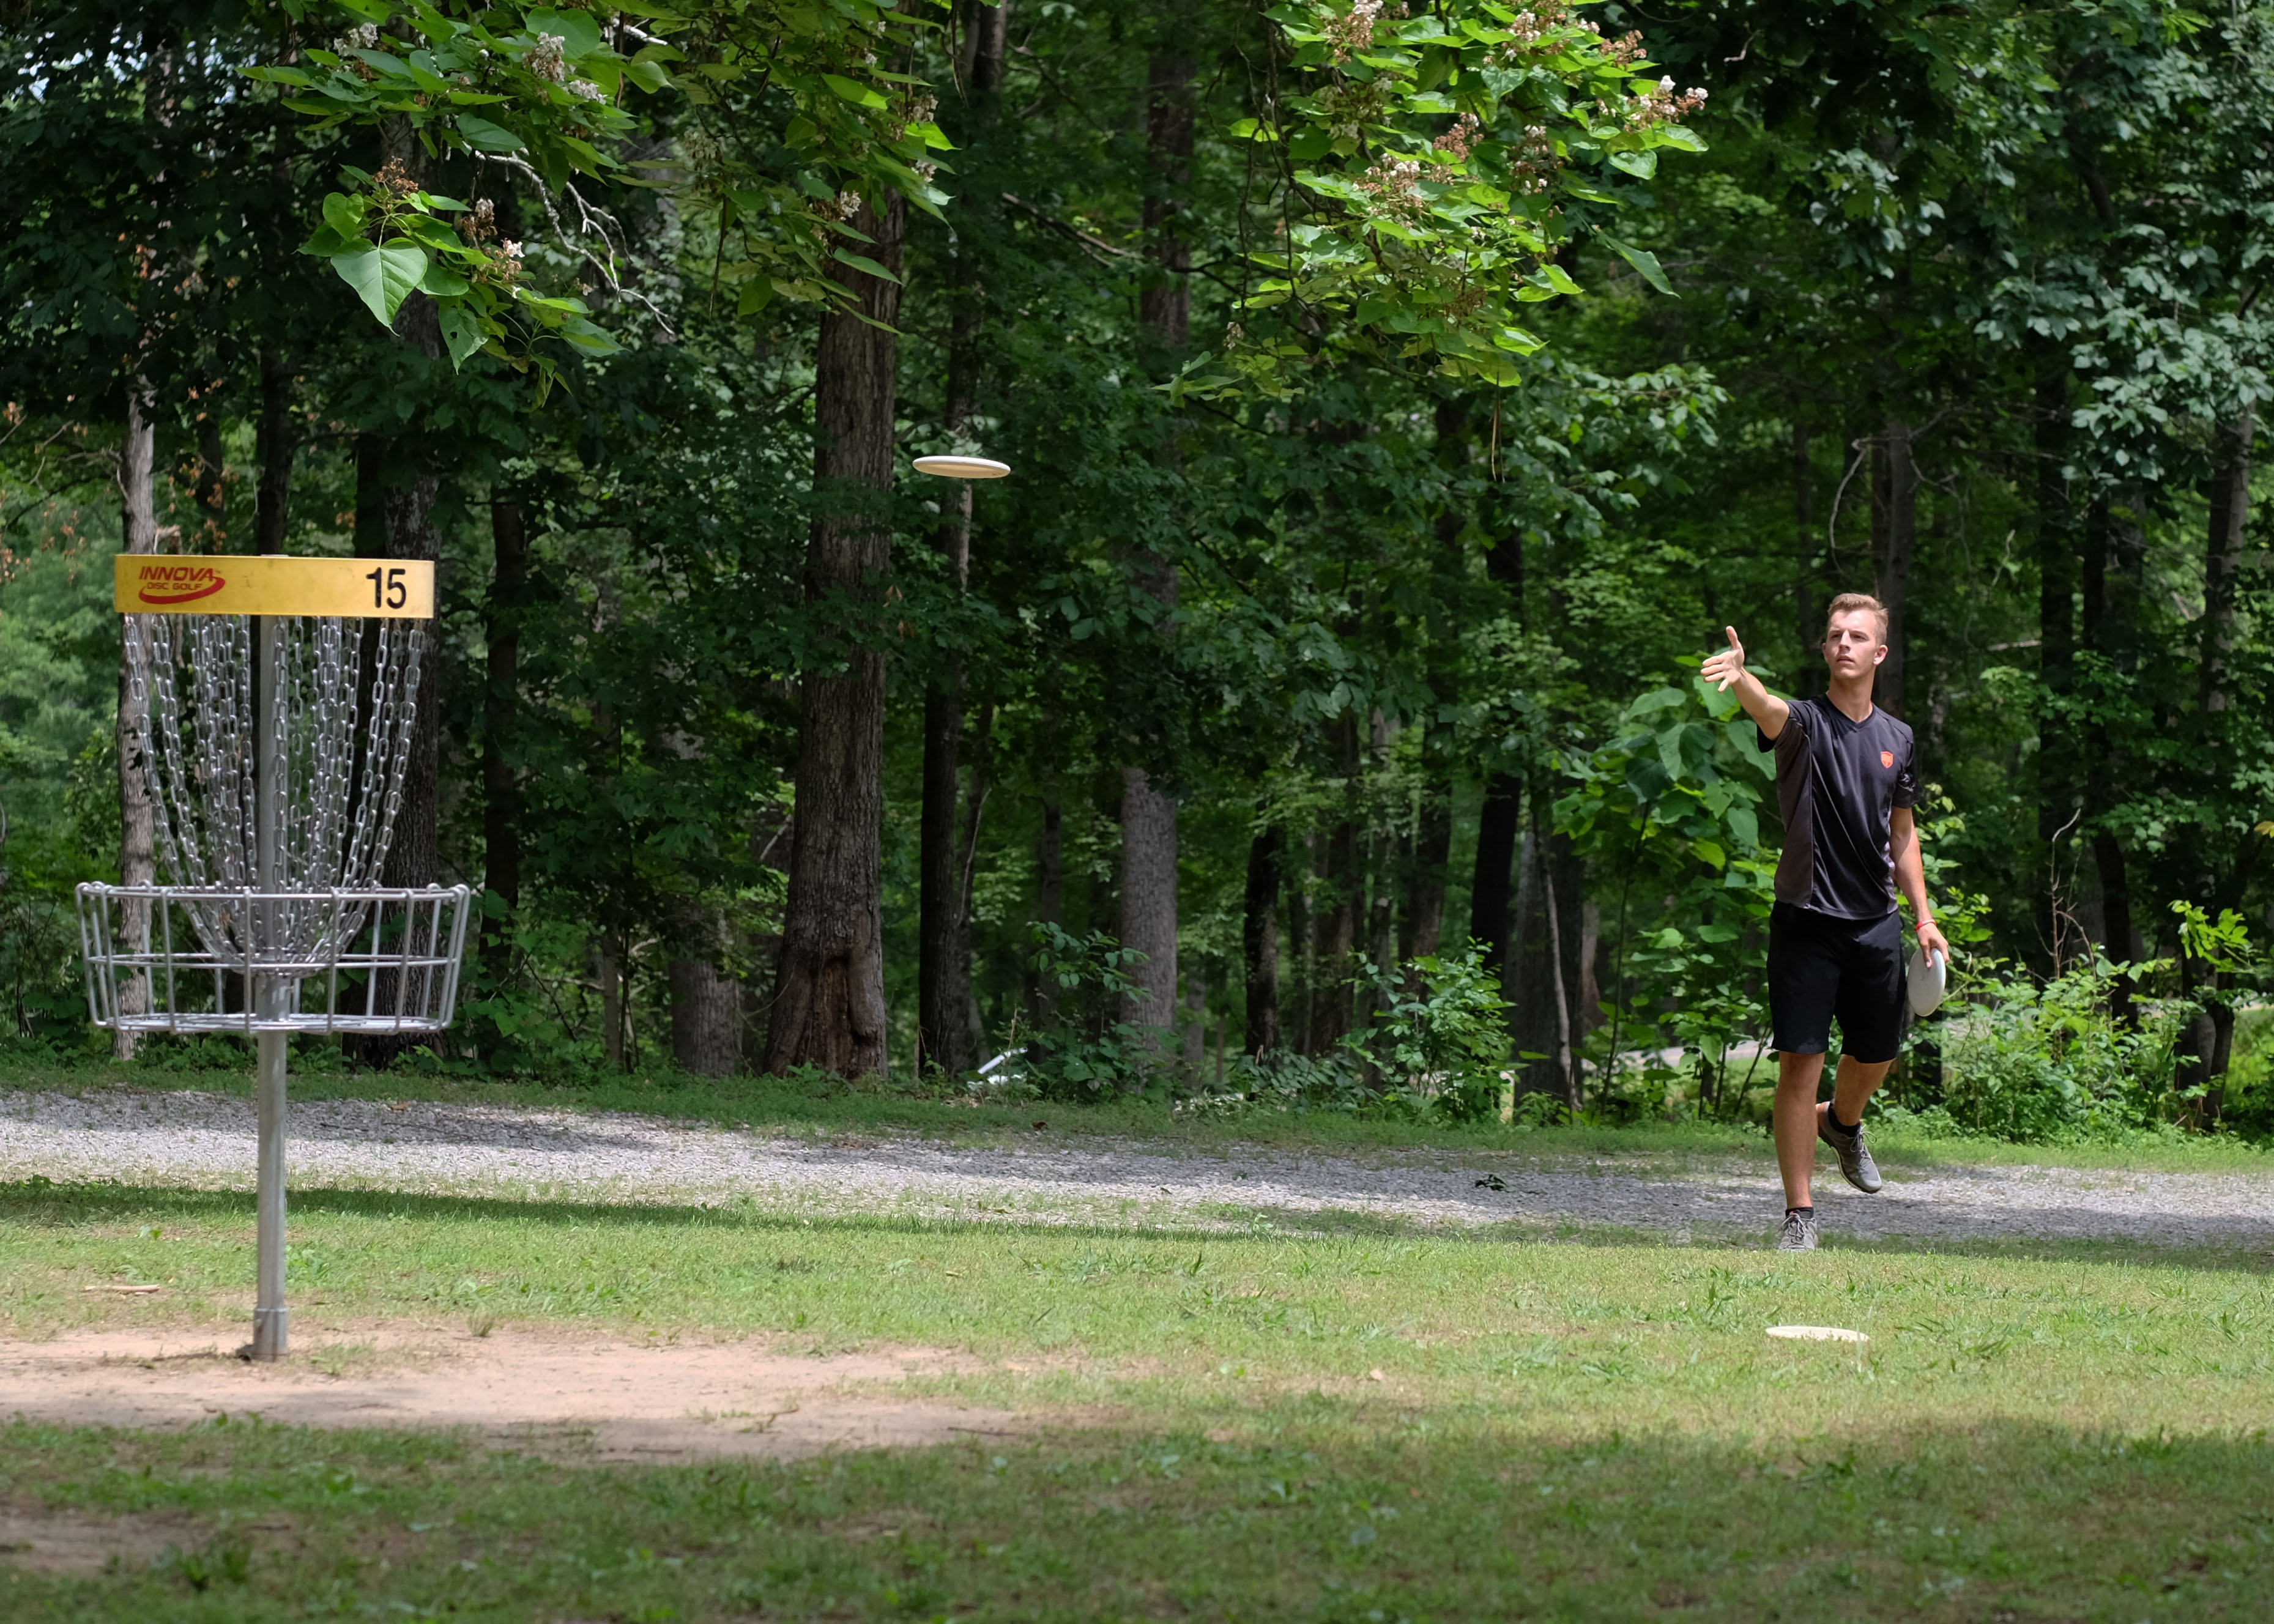 An image showing man playing disc golf frisbee